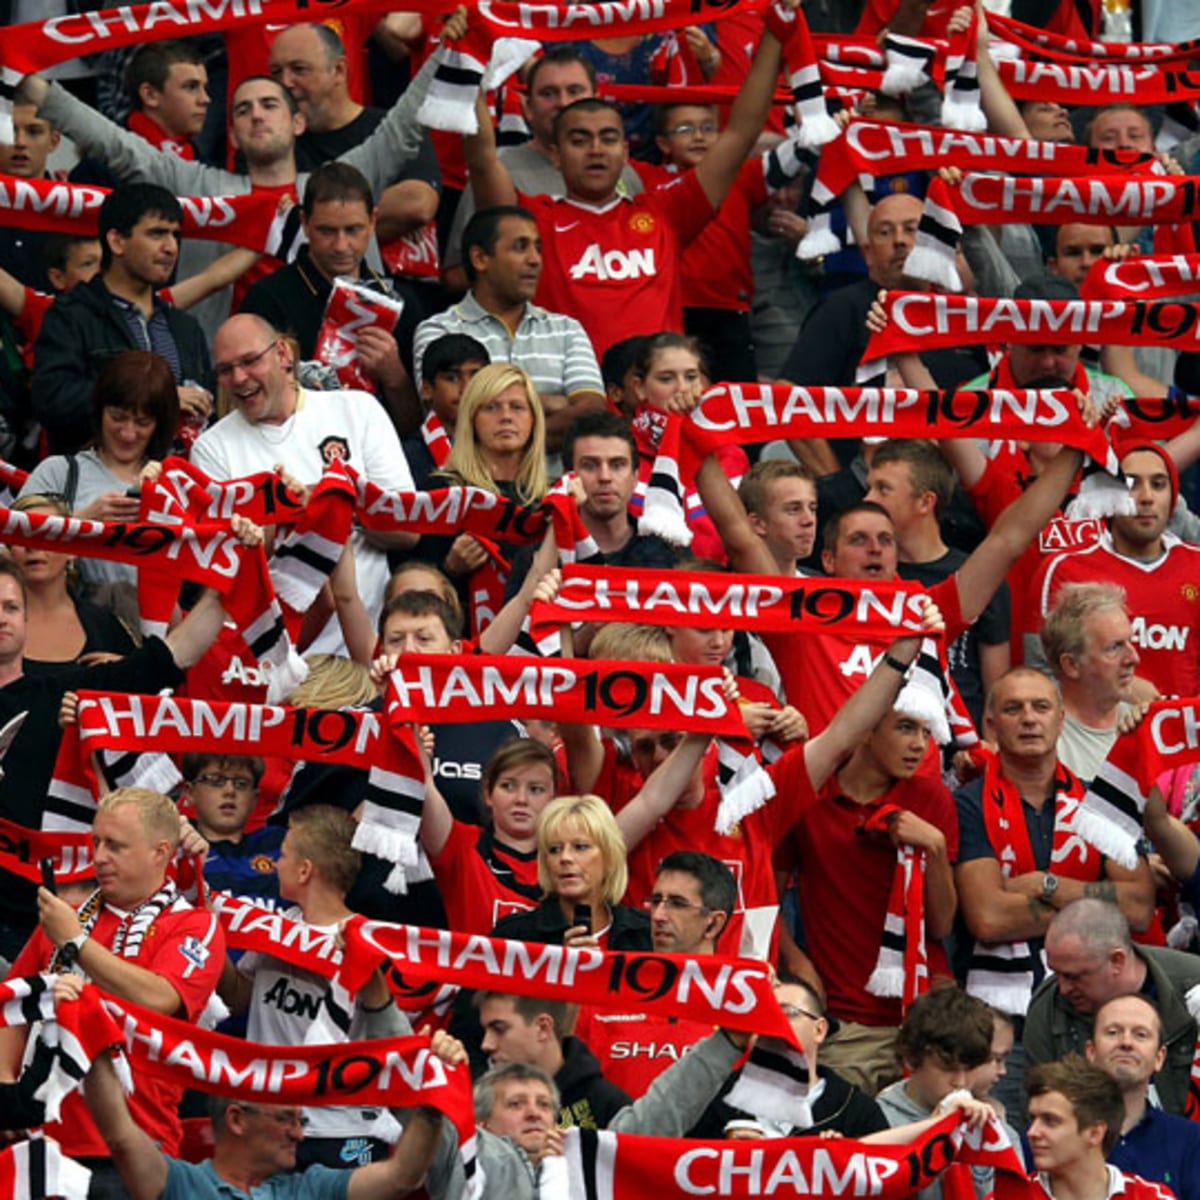 Manchester United Fans Brawl With Guys In Where S Waldo